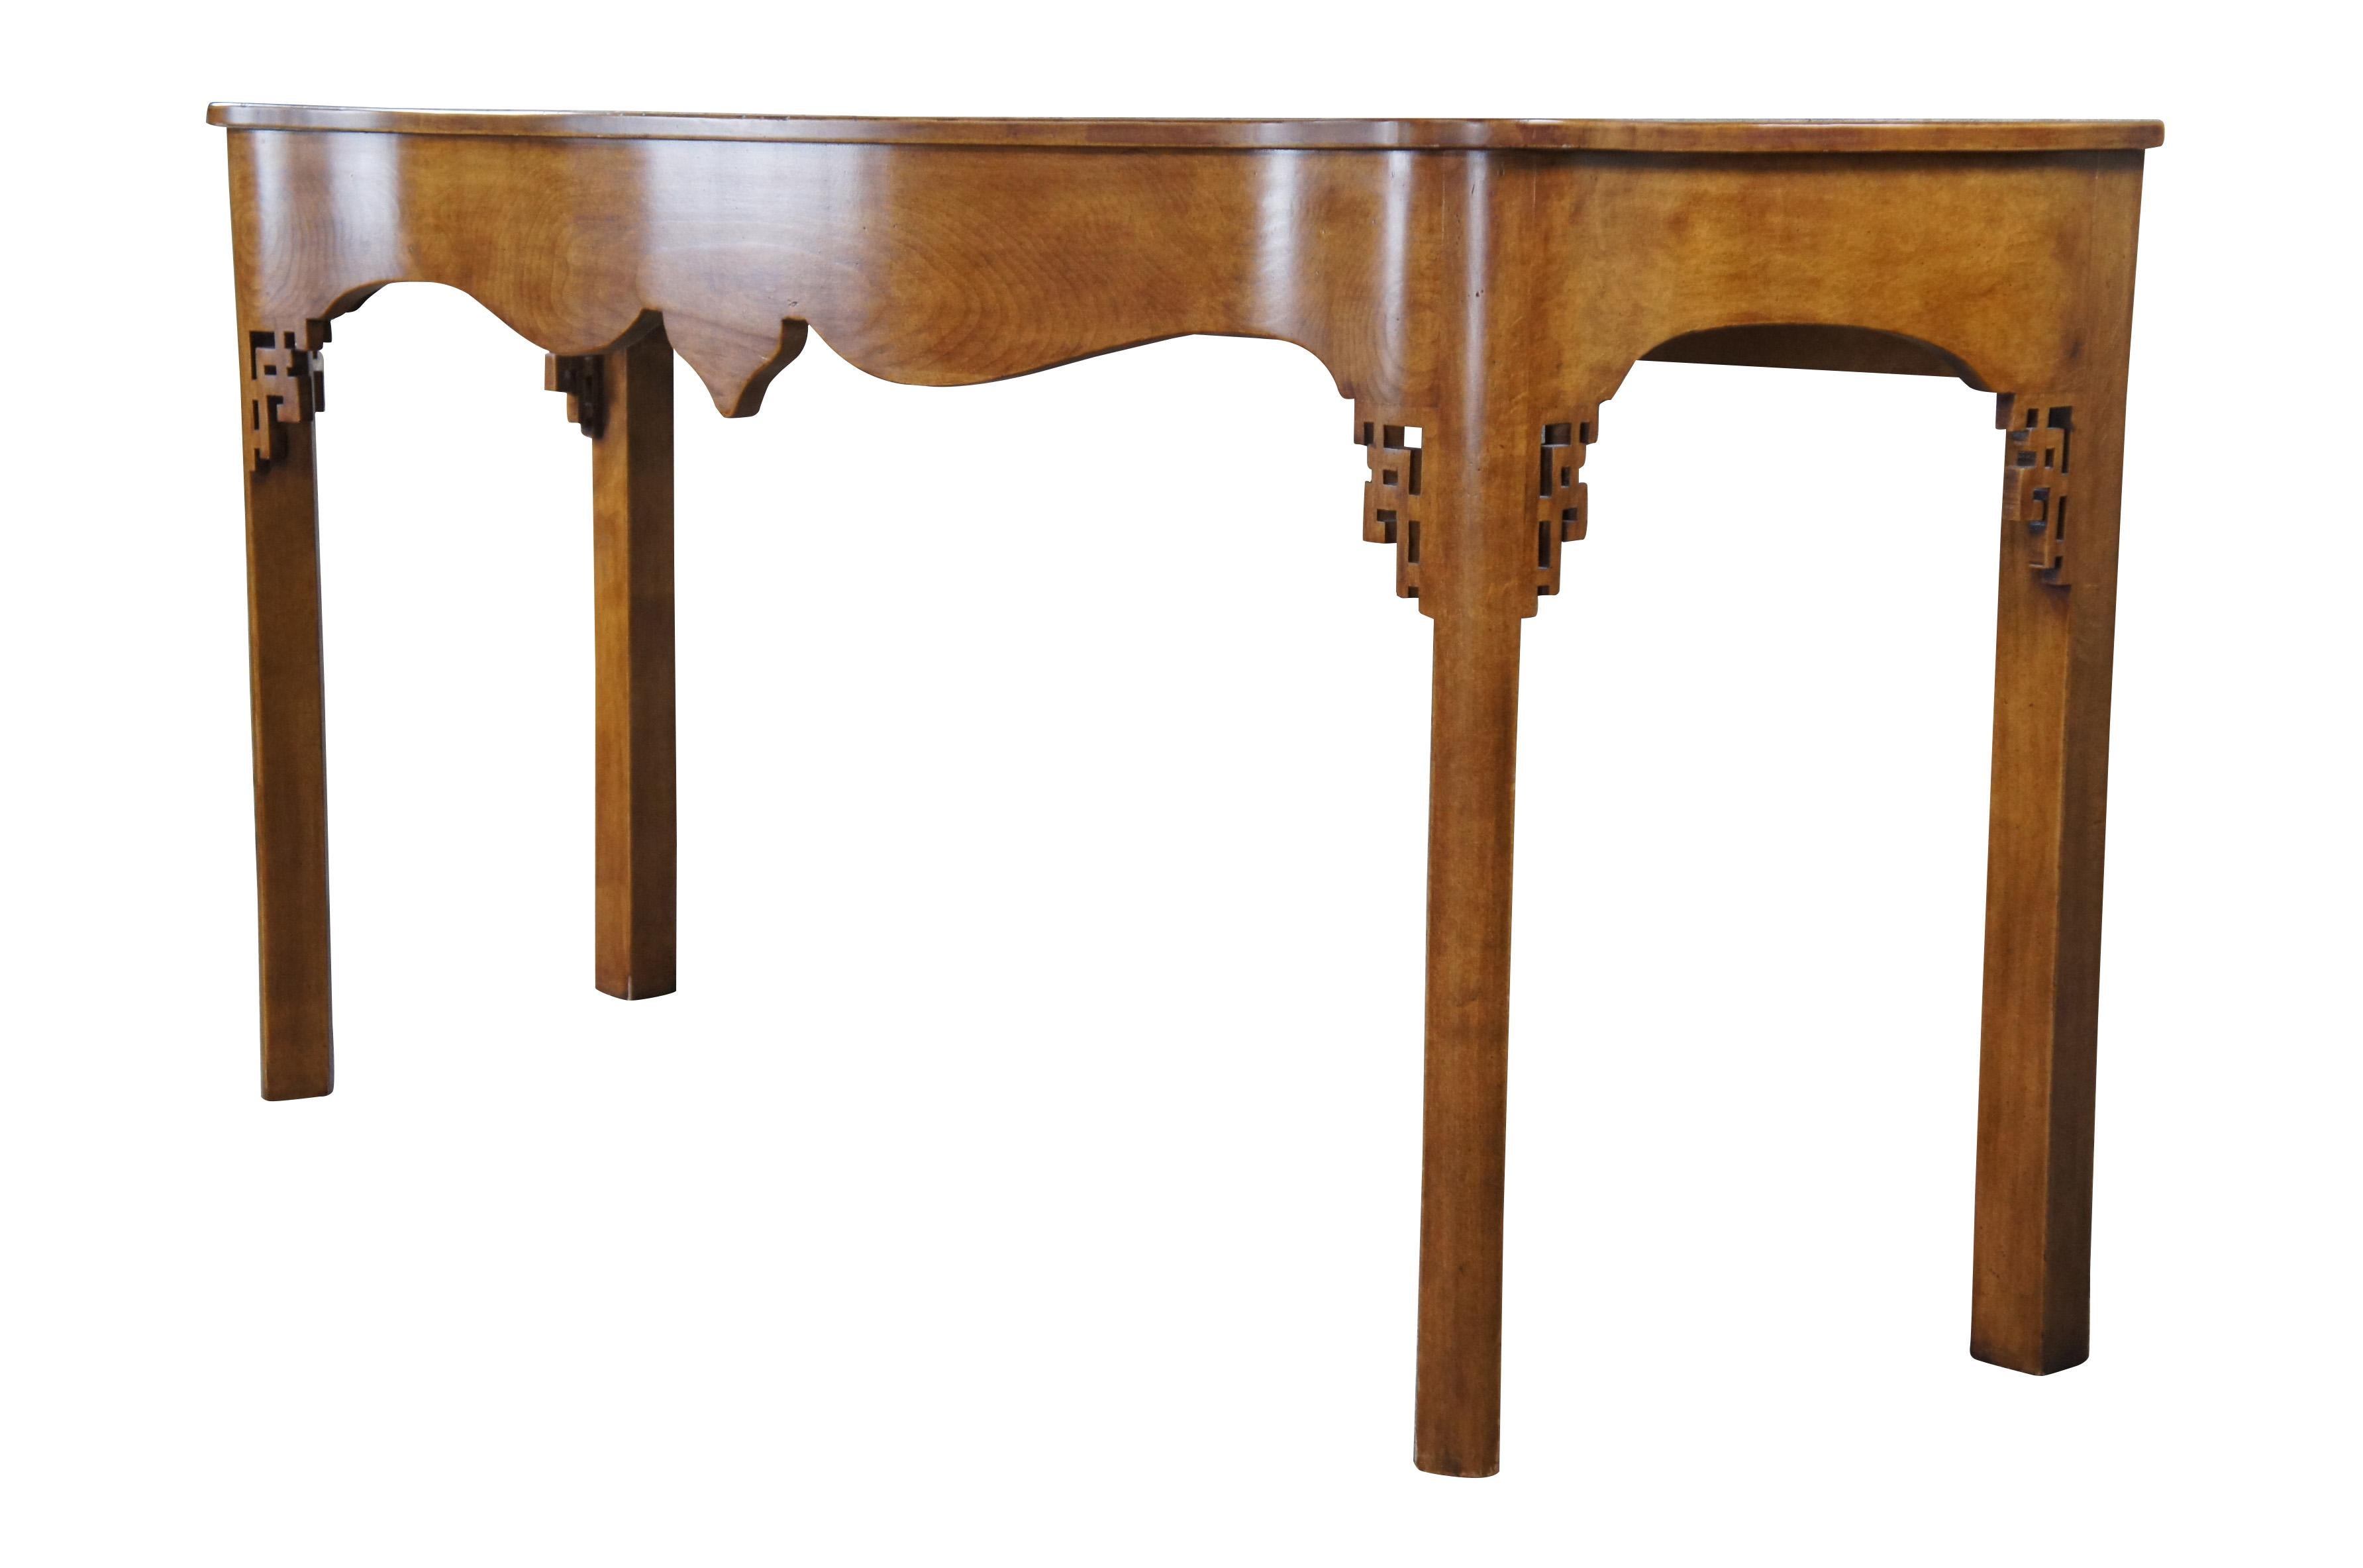 Vintage Minton Spidell Lyford Console or sideboard table.  Made of walnut featuring Chinese Chippendale and serpentine styling.

Minton-Spidell has been handcrafting beautiful furniture in Los Angeles, California for over 50 years. They are known